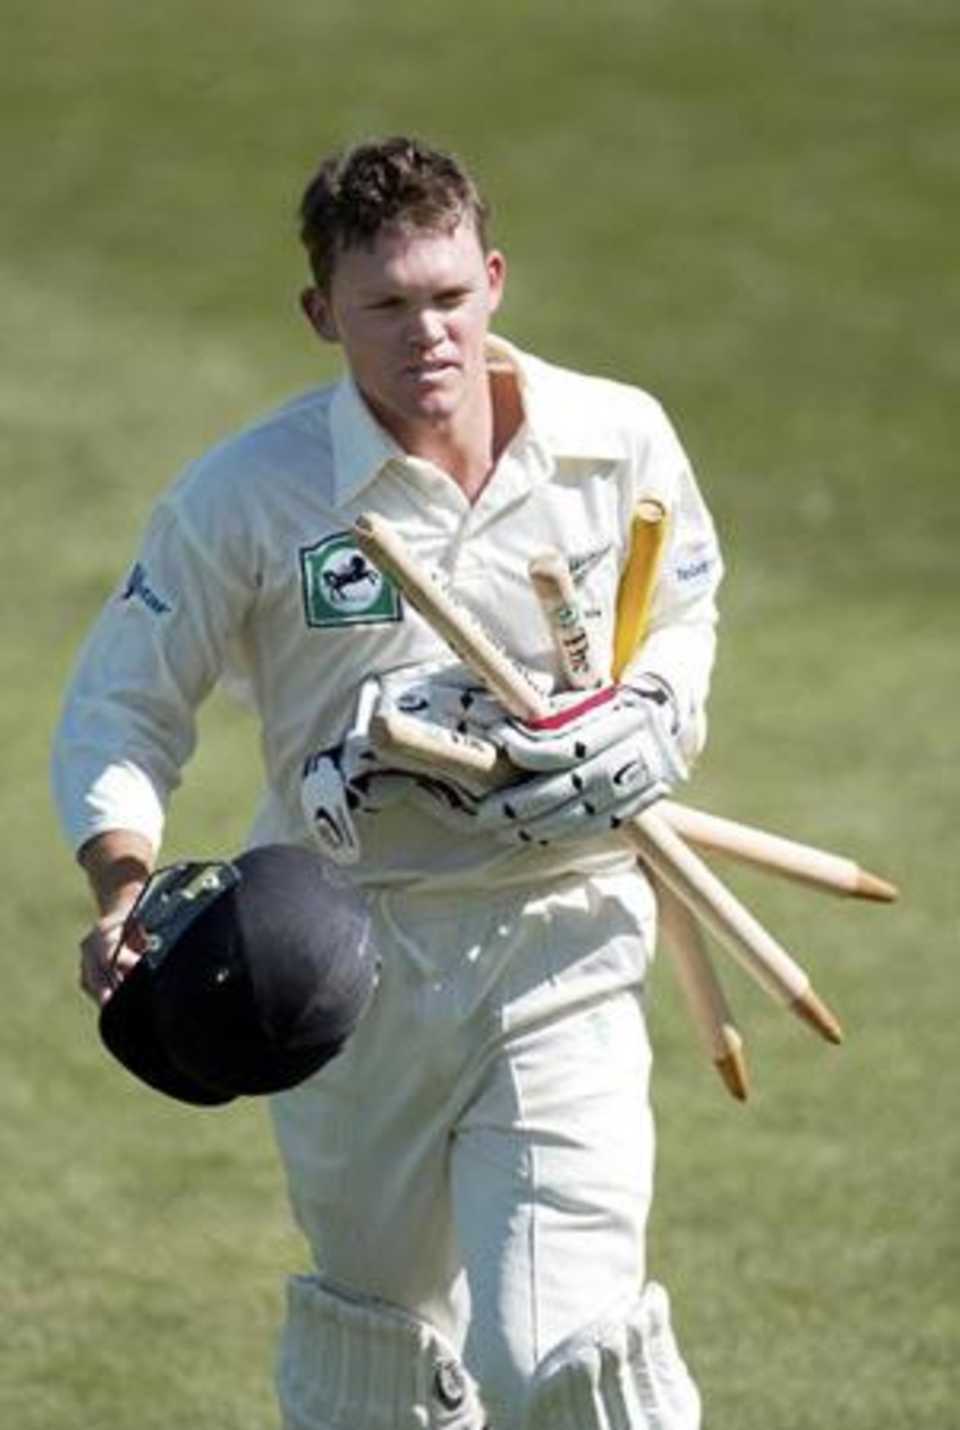 New Zealand batsman Lou Vincent runs from the field with a clutch of stumps after New Zealand won the match, beating India by 10 wickets. Vincent ended his second innings on 21 not out. 1st Test: New Zealand v India at Basin Reserve, Wellington, 12-16 December 2002 (14 December 2002).